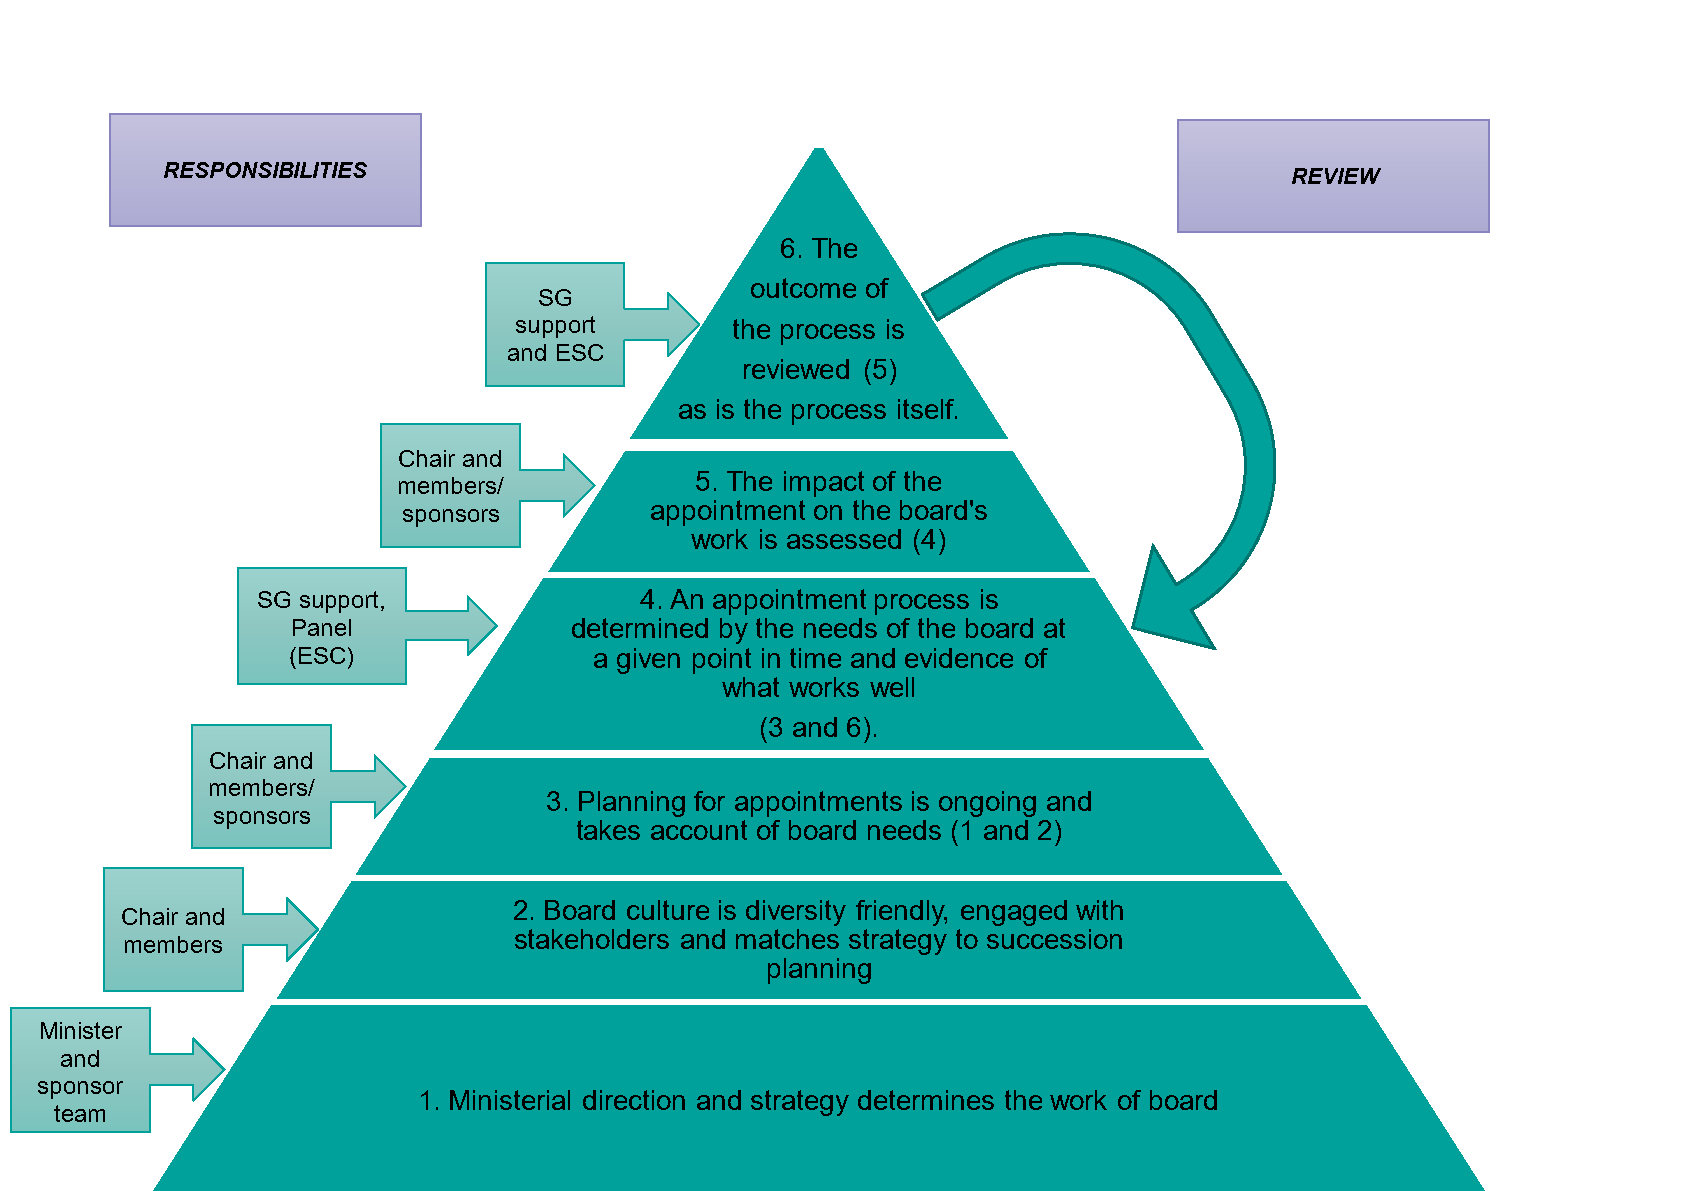 A pyramid diagram illustrating where the various responsibilities for making good appointments lie. 